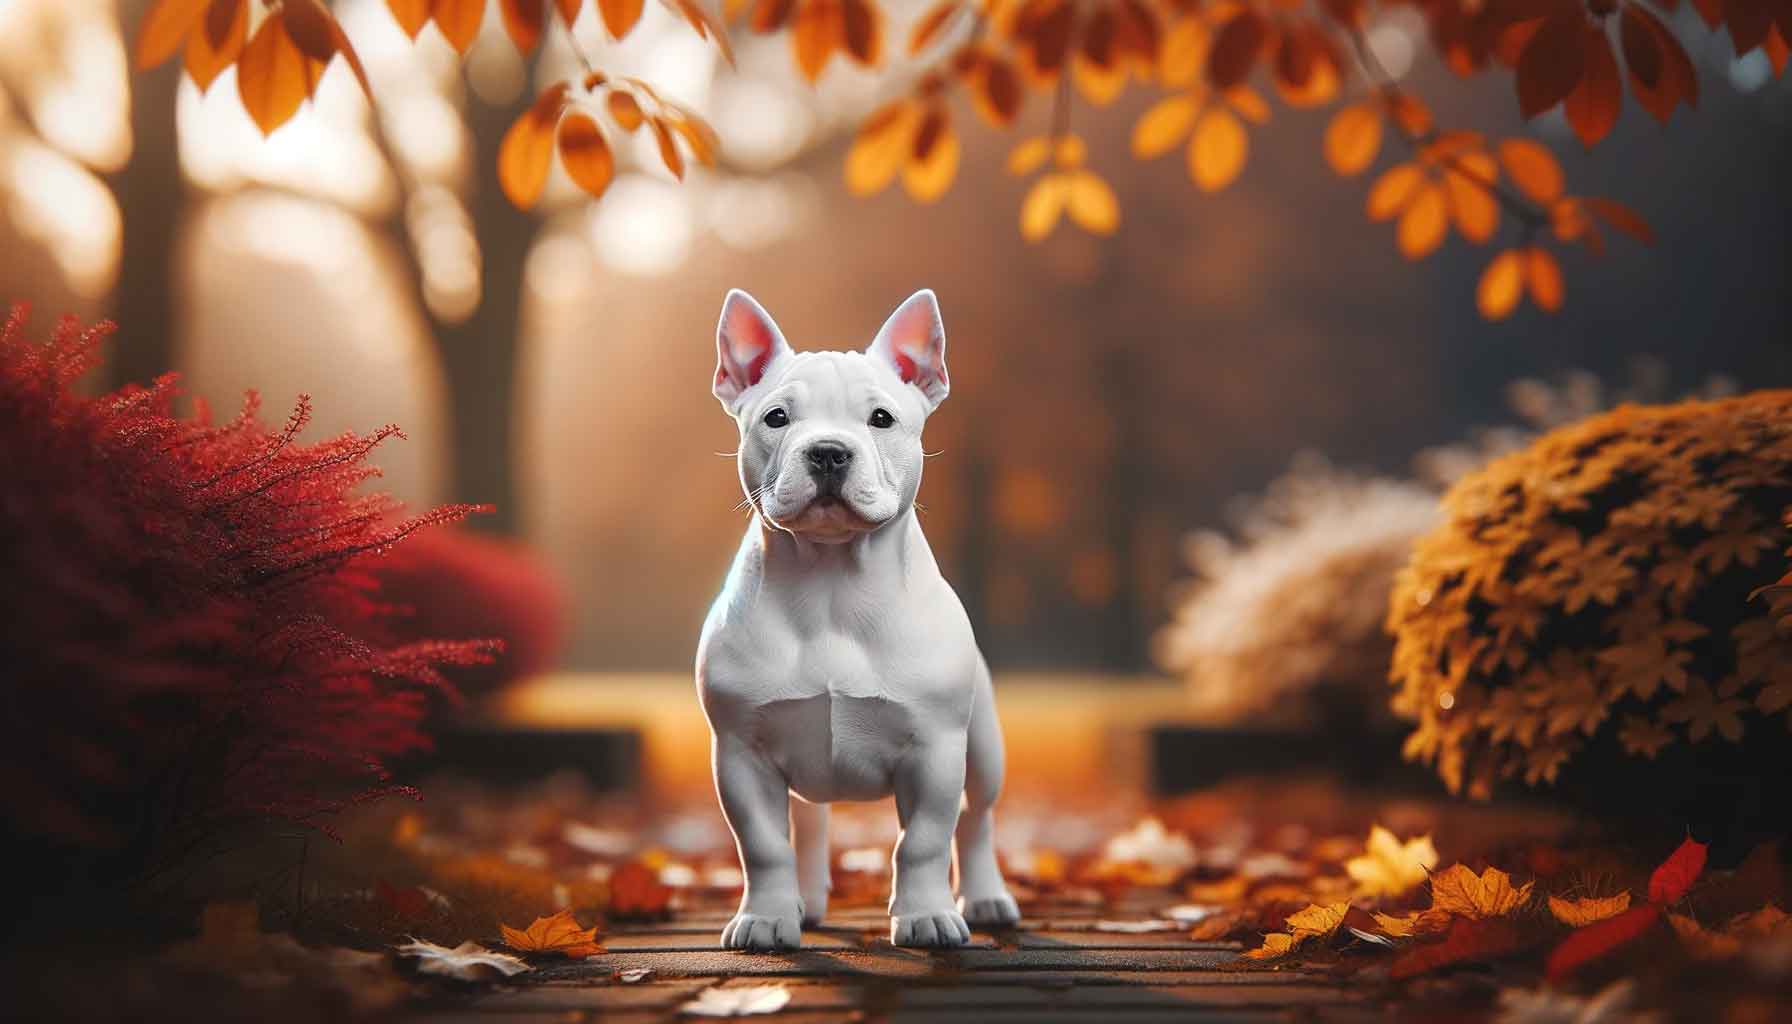 White Micro Bully standing outdoors surrounded by vibrant autumn leaves, its pristine coat offering a stark contrast to the warm tones.